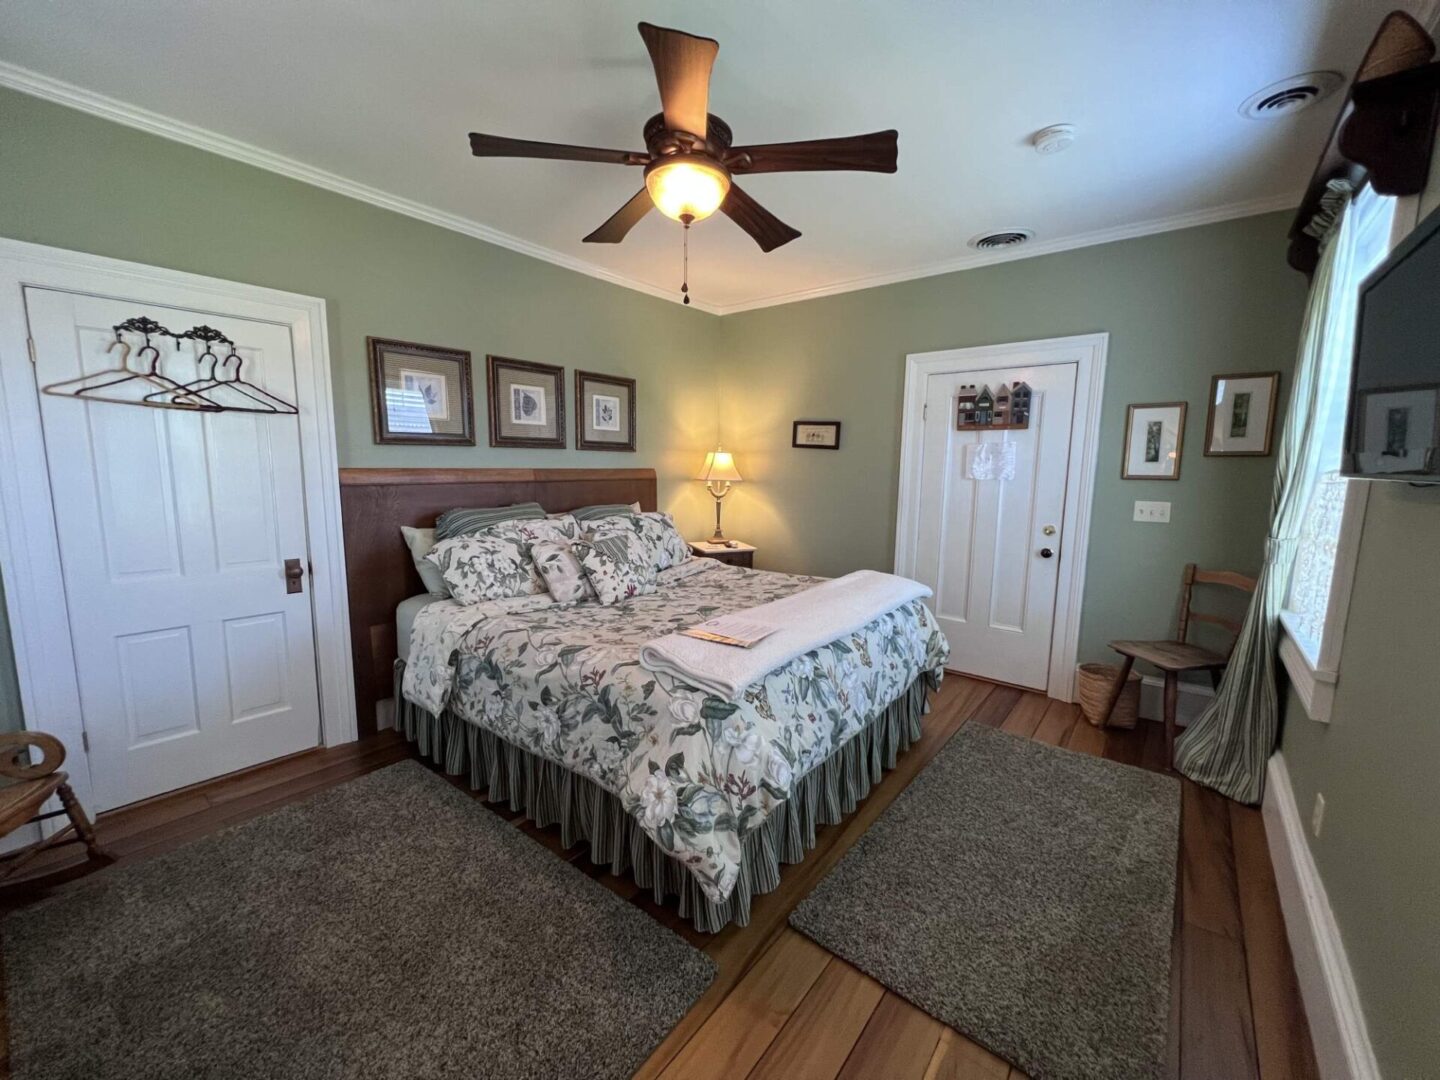 A bedroom with a bed, ceiling fan and two doors.